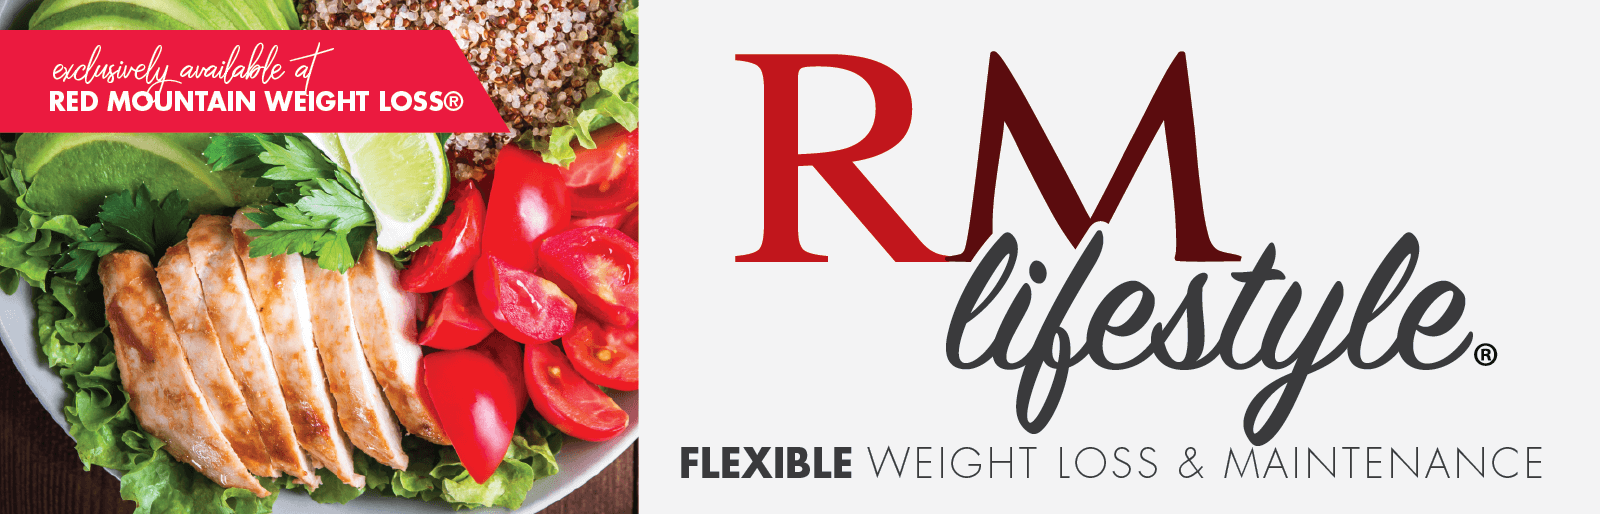 red mountain weight loss diet plan